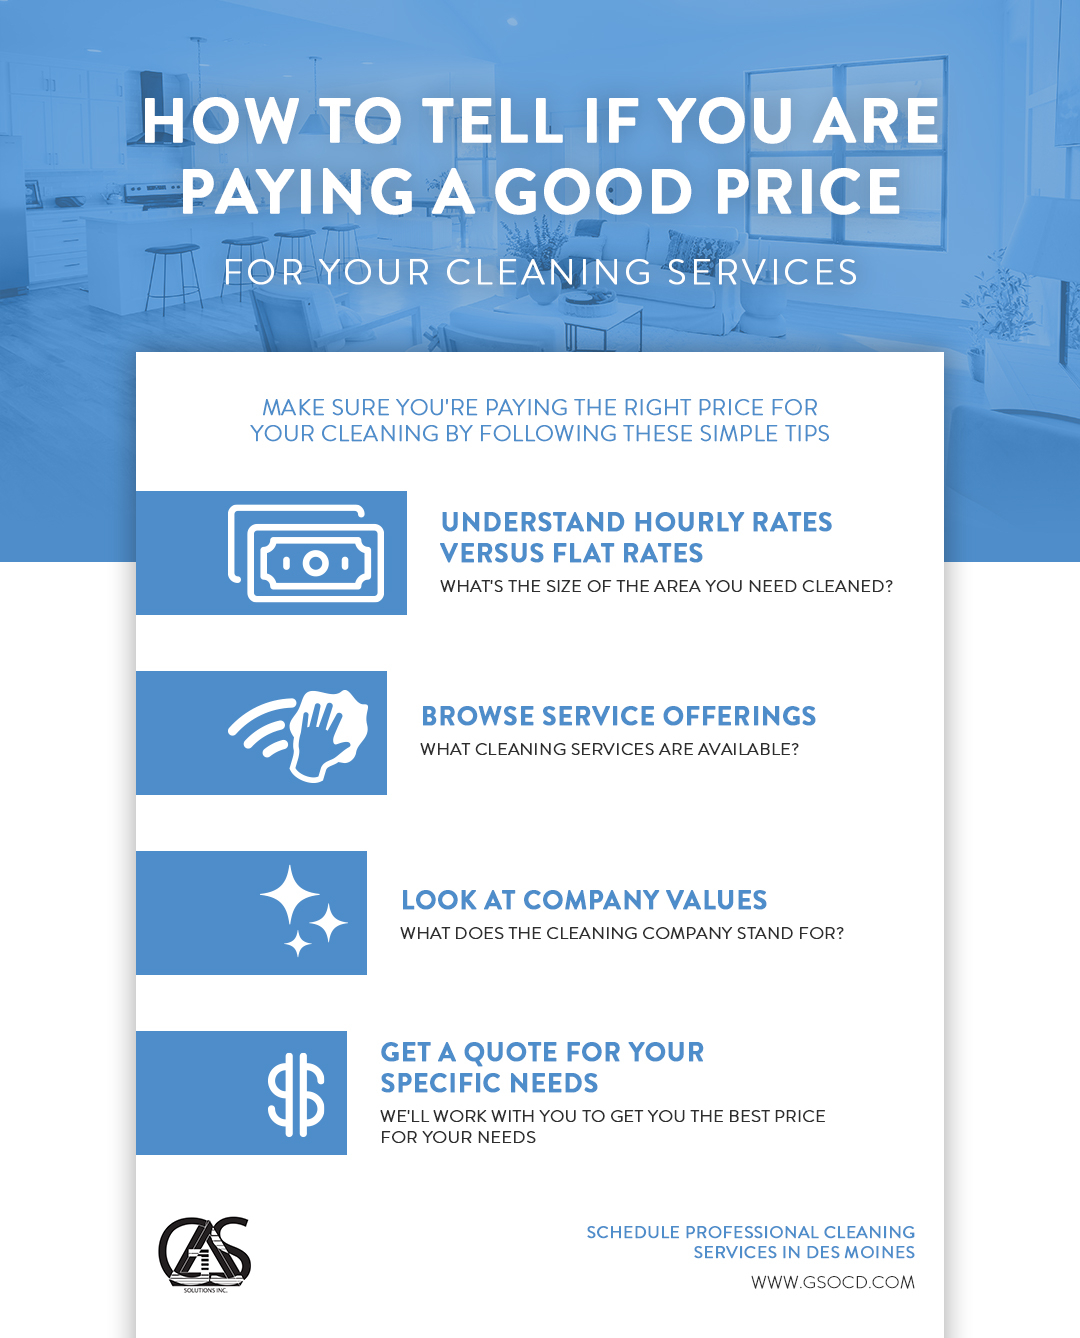 How To Tell if You Are Paying a Good Price for Your Cleaning Services.jpg